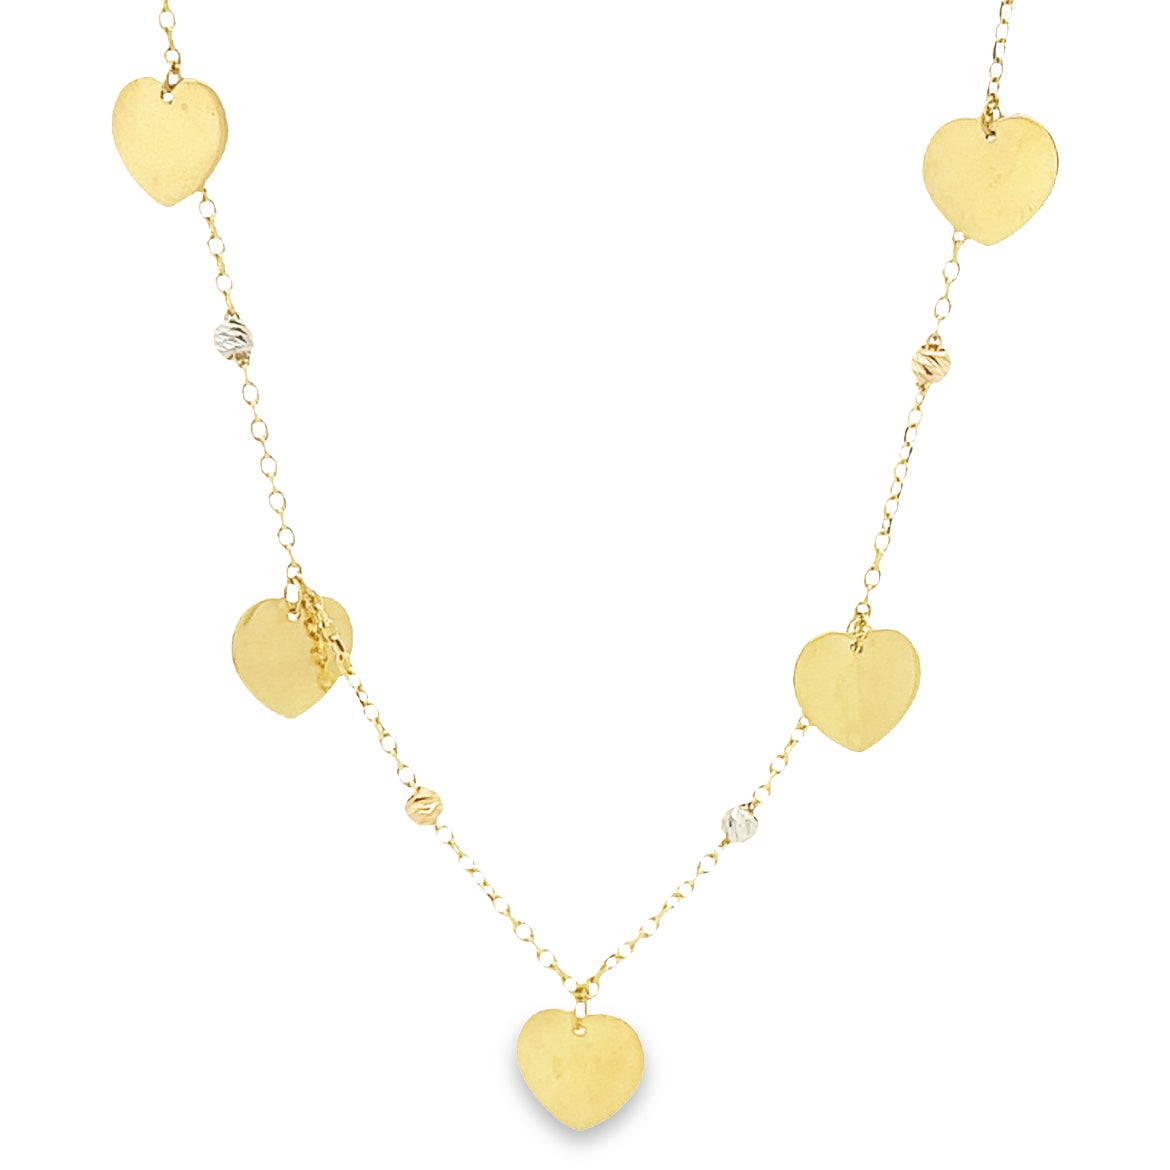 14K GOLD MULTI HEART CHARMS NECKLACE